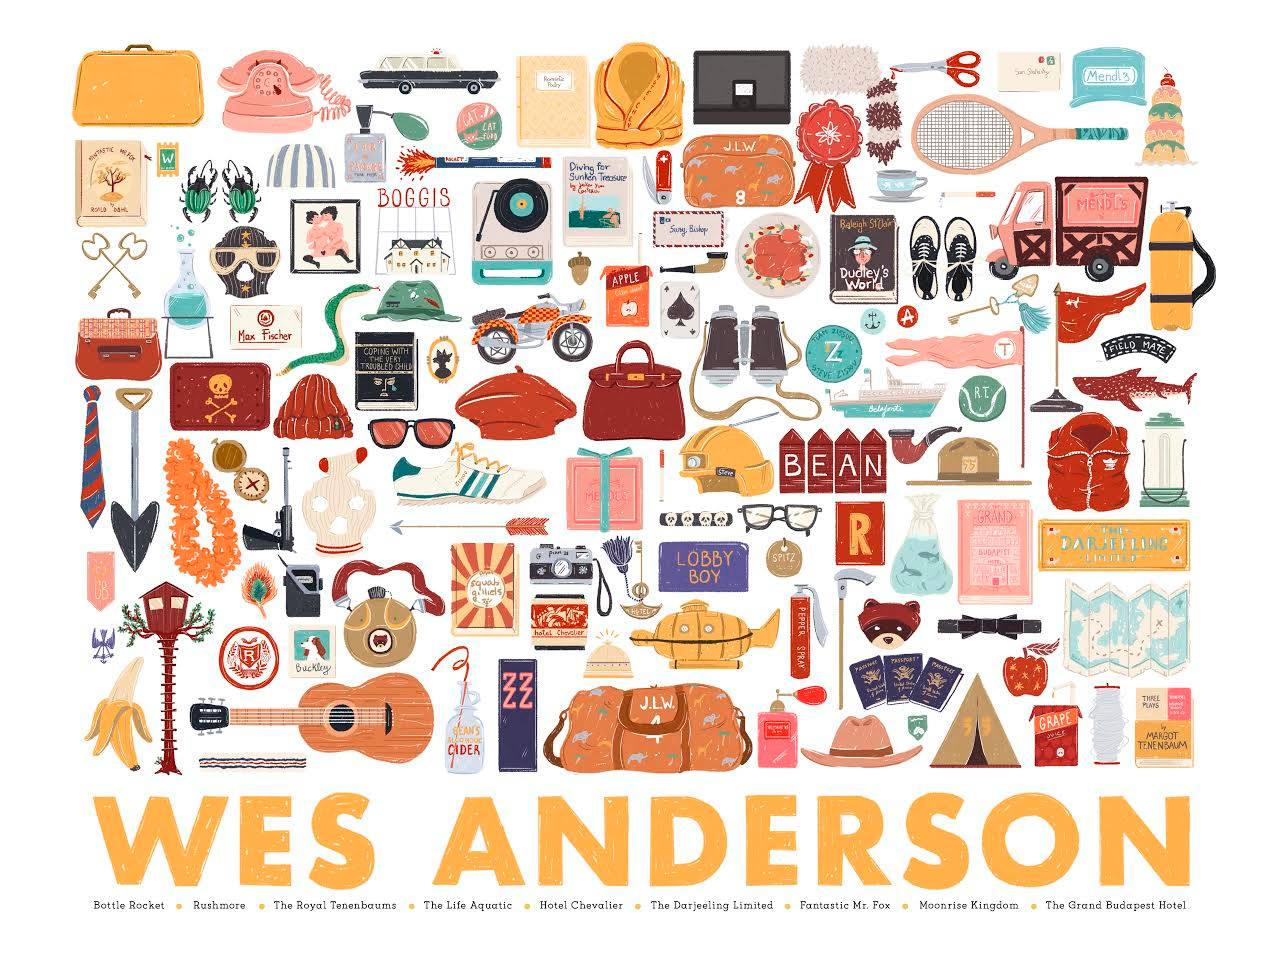 Annual Wes Anderson Art Show